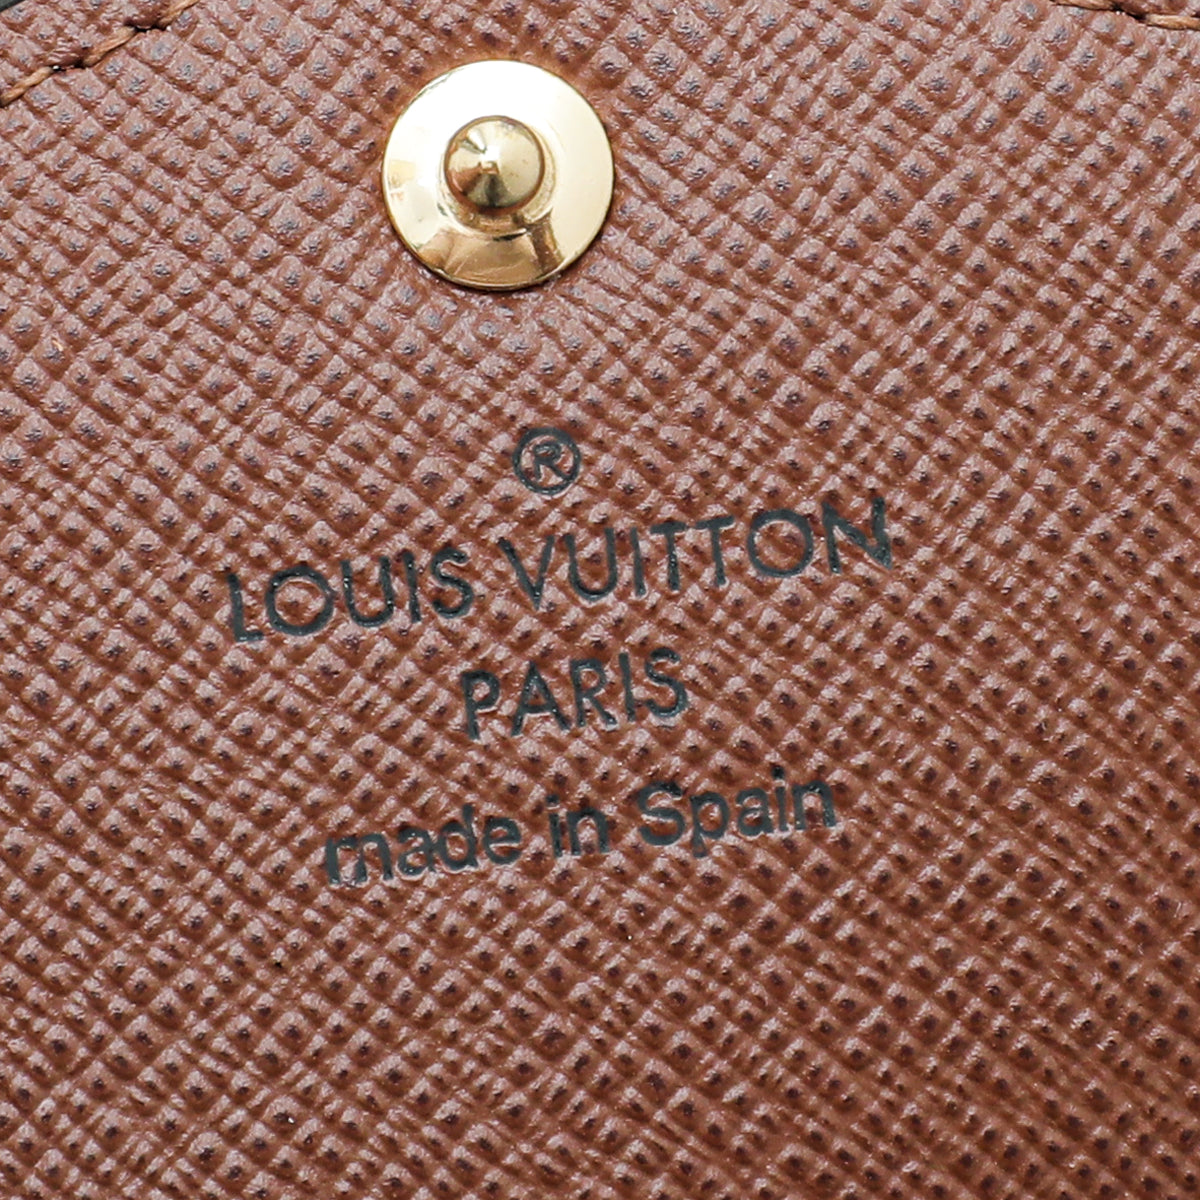 Sarah leather wallet Louis Vuitton Brown in Leather - 36778061